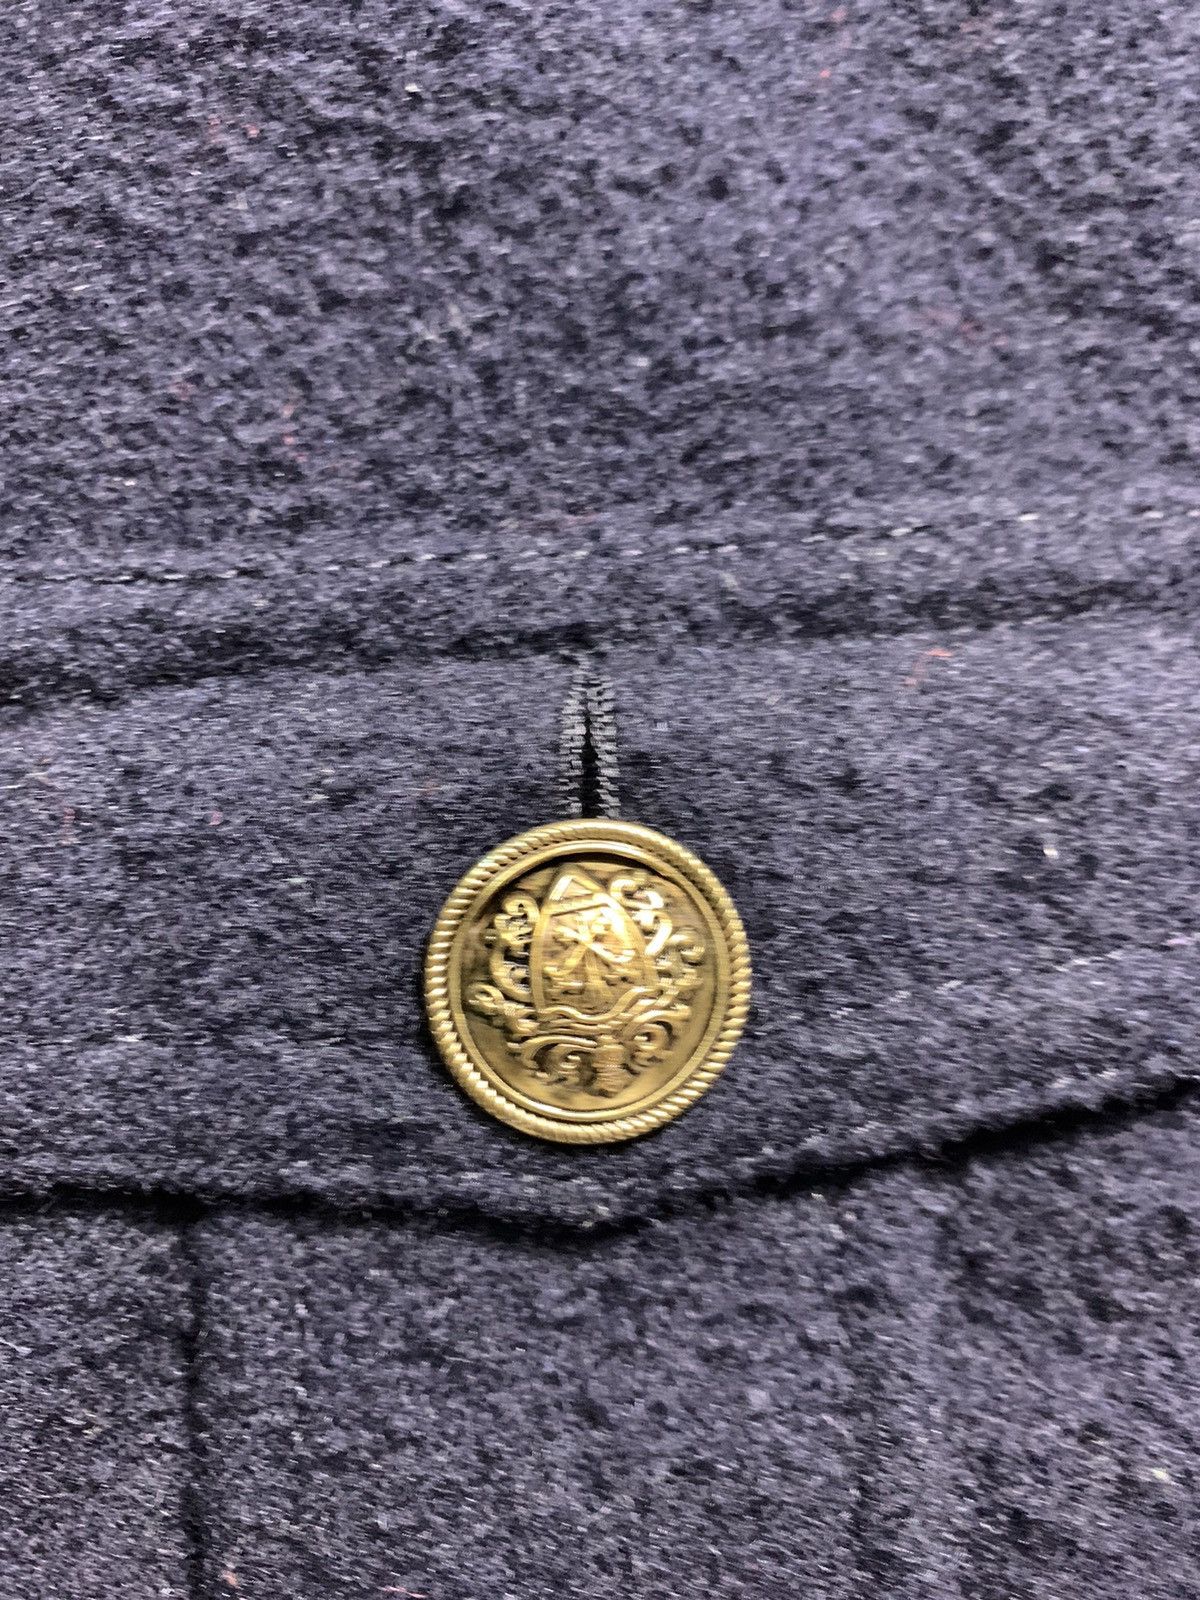 🔥TRICOTS CdG WOOL GOLD BUTTON JACKETS - 10